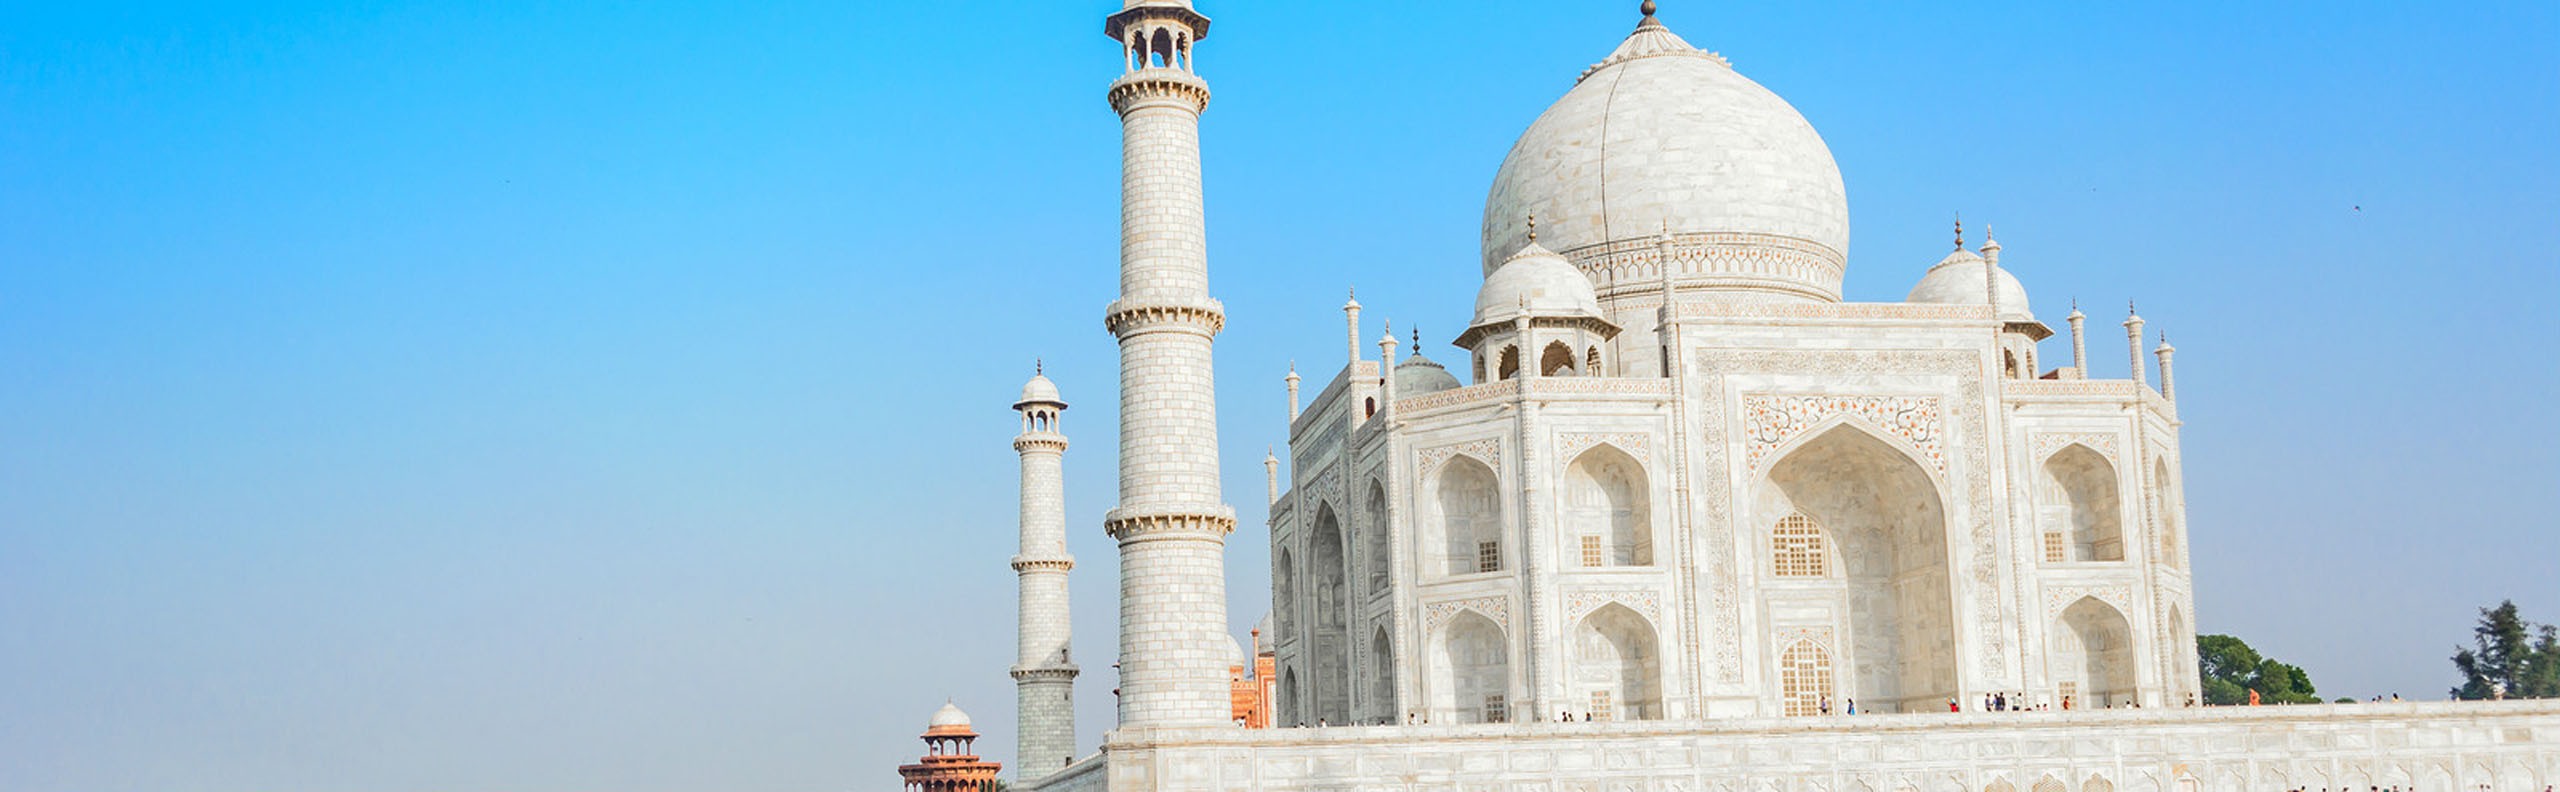 20 Interesting Facts about the Taj Mahal